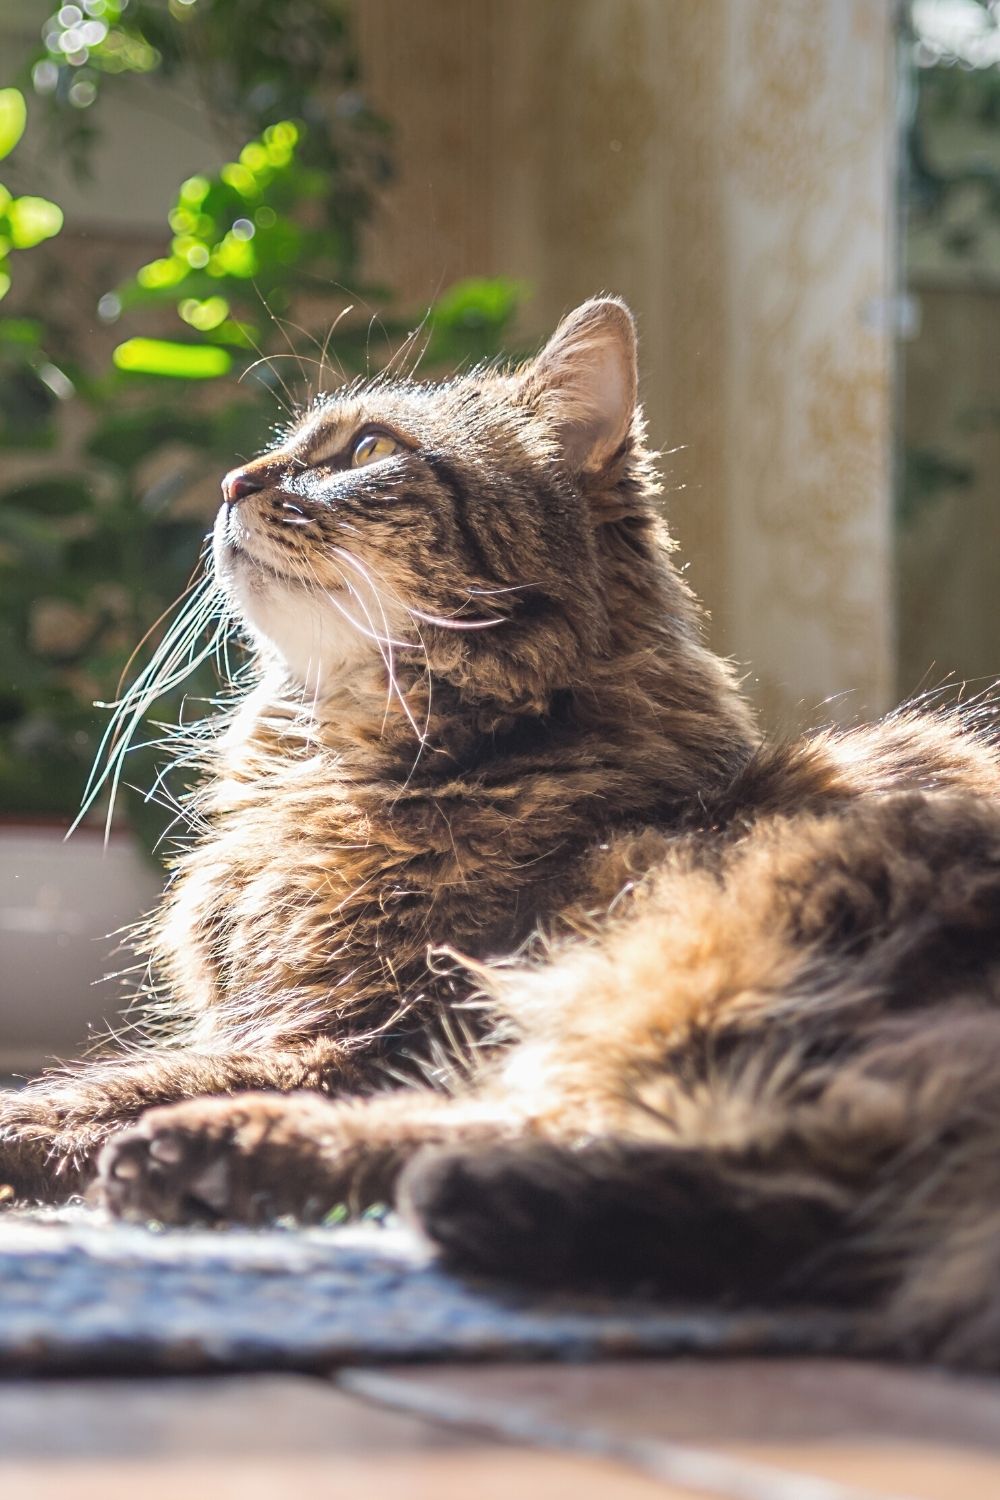 When cats sit in the sun, their noses sometimes get dry